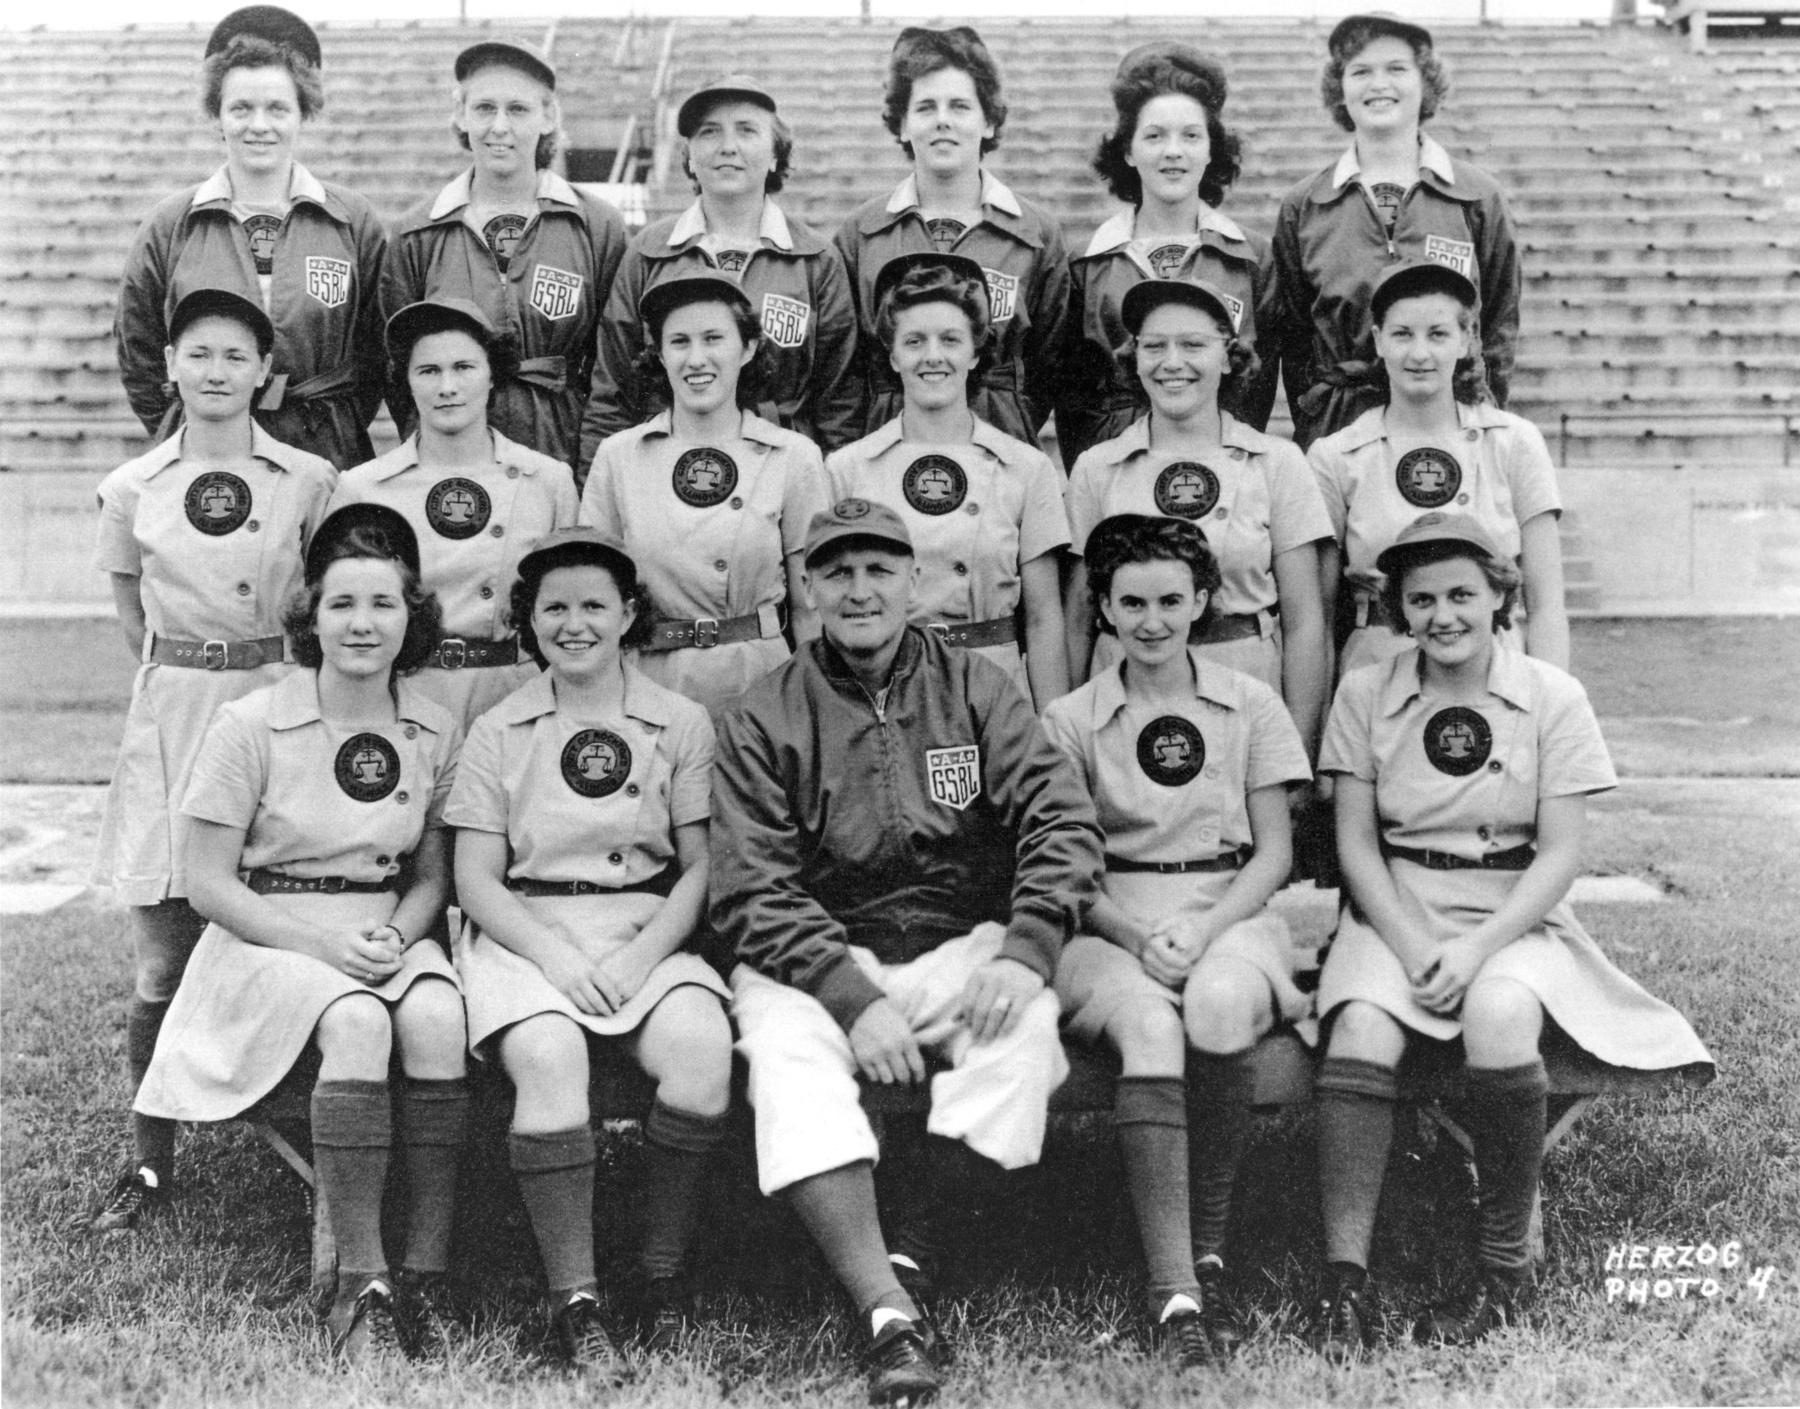 League of their own: Women baseball players together again